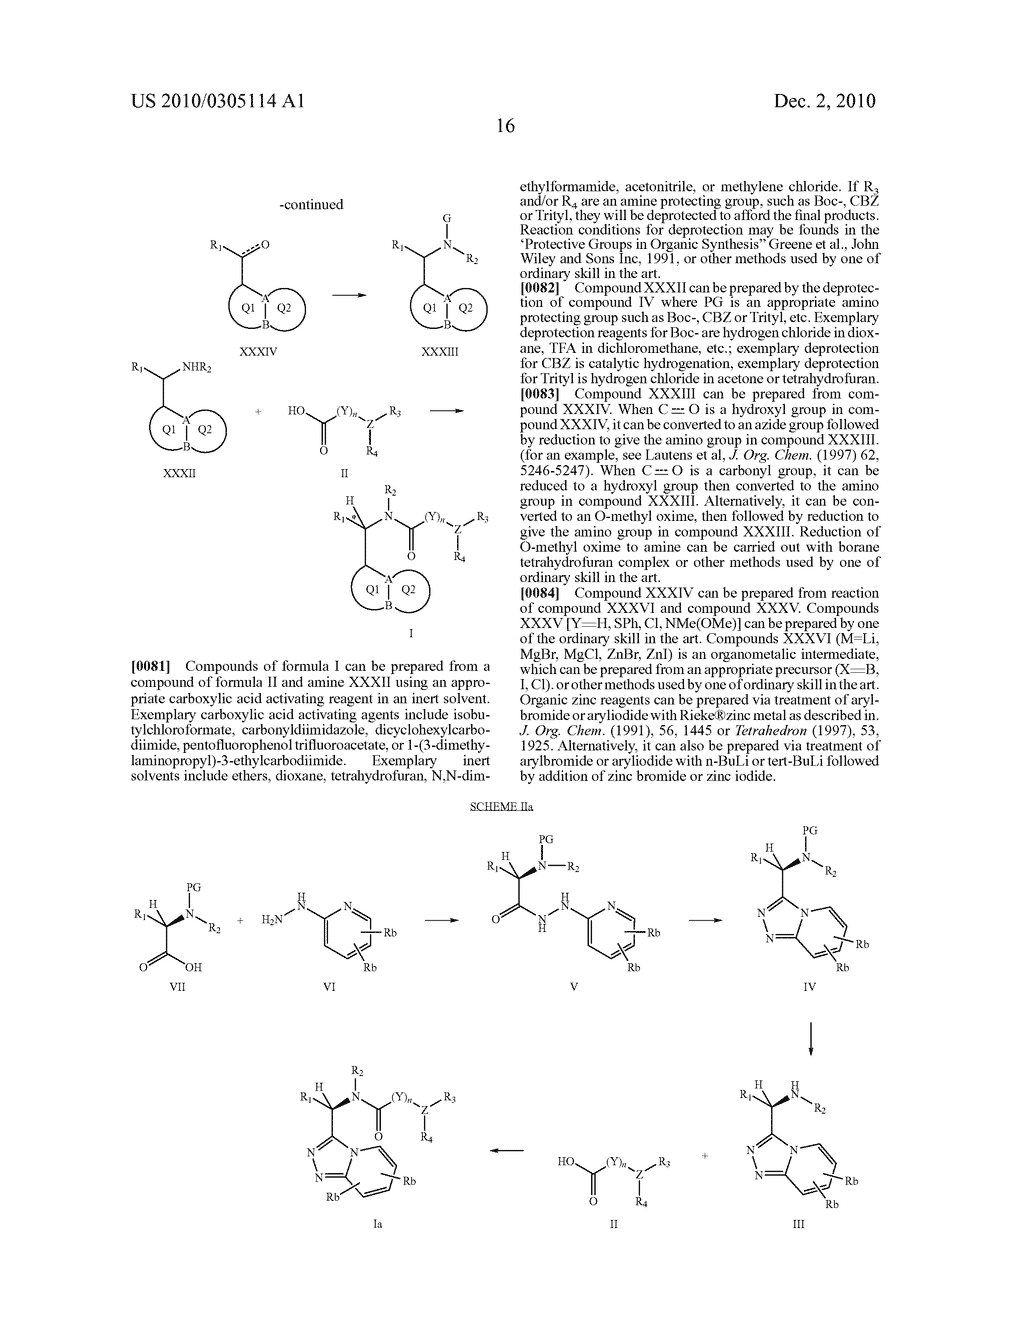 Heterocyclic Aromatic Compounds Useful As Growth Hormone Secretagogues - diagram, schematic, and image 17